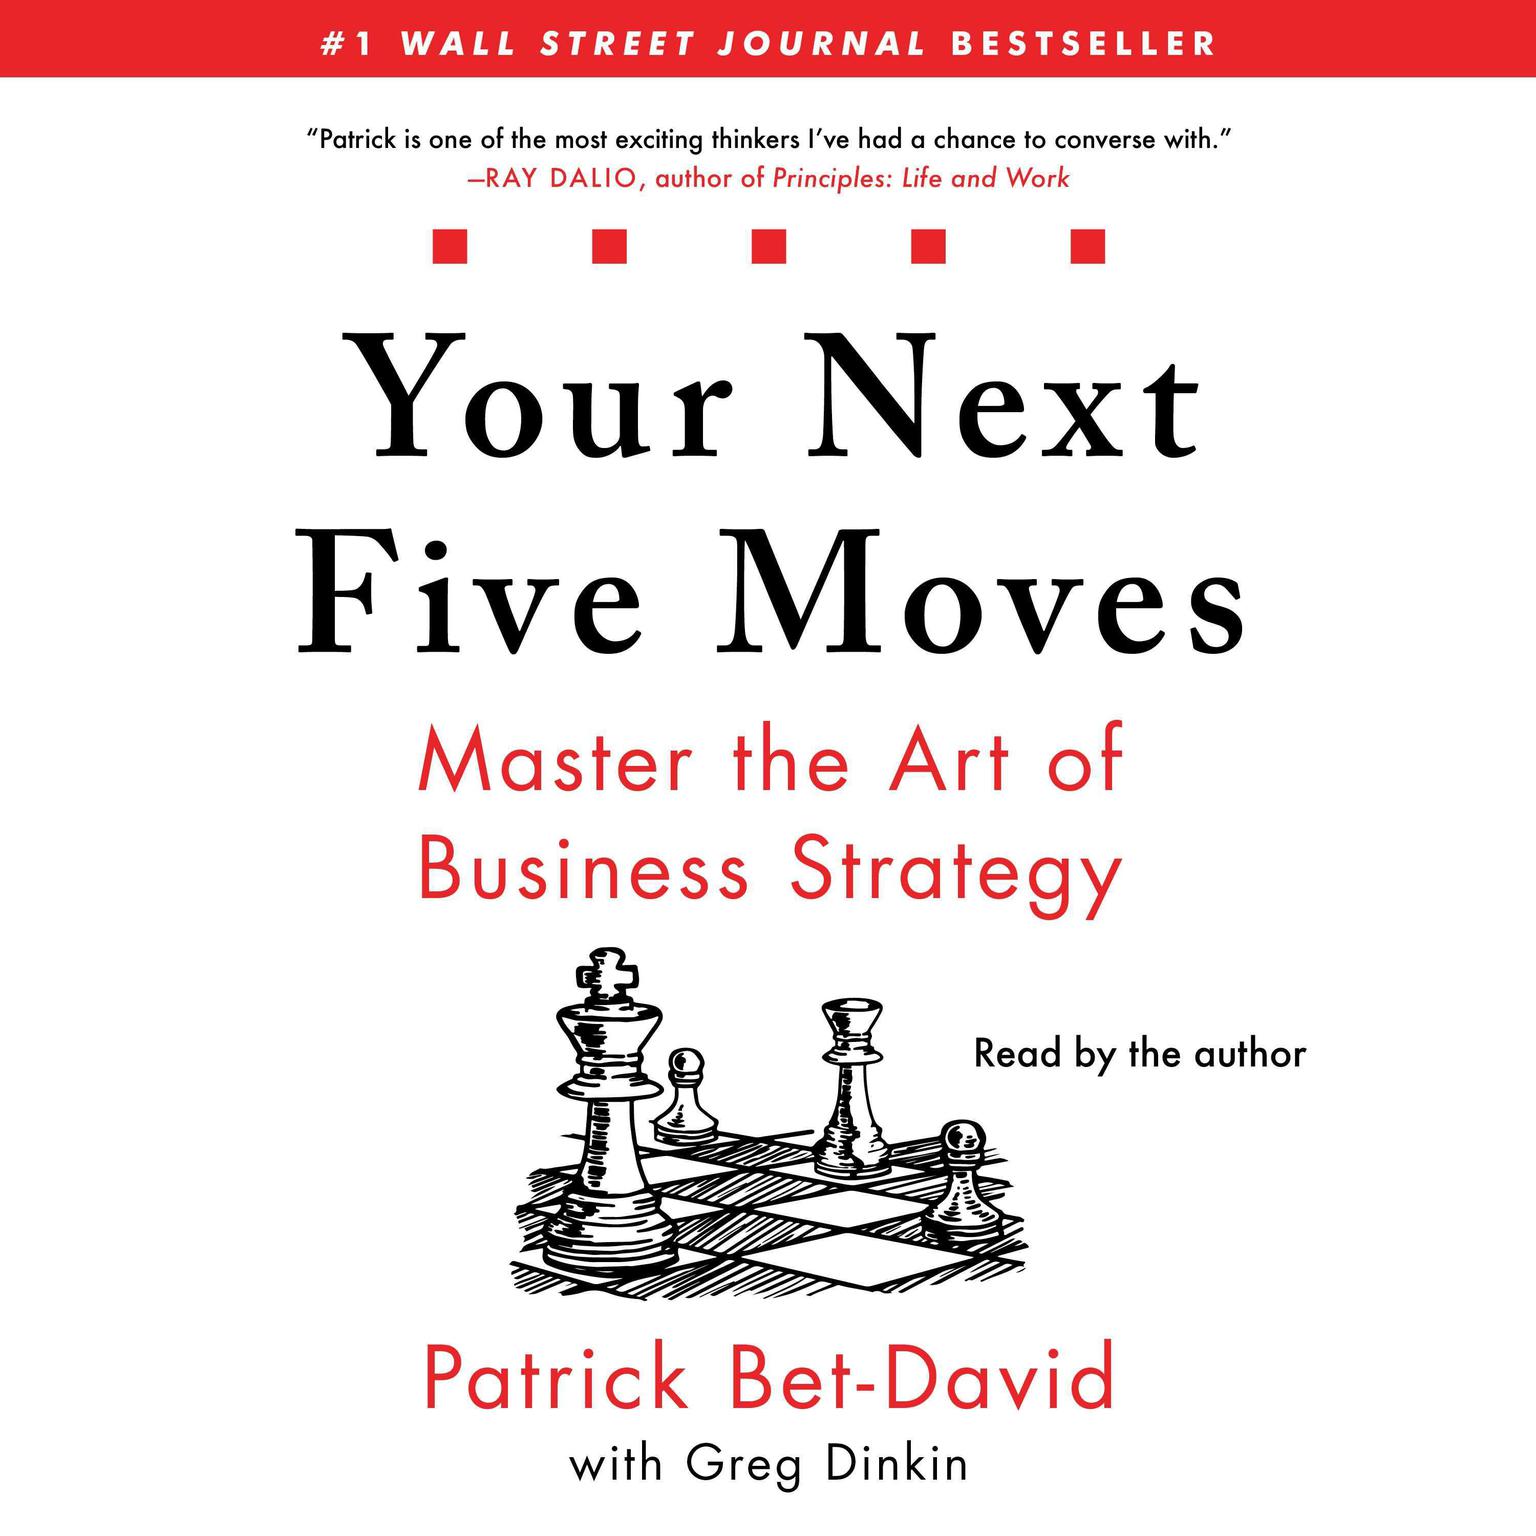 Your Next Five Moves: Master the Art of Business Strategy Audiobook, by Patrick Bet-David